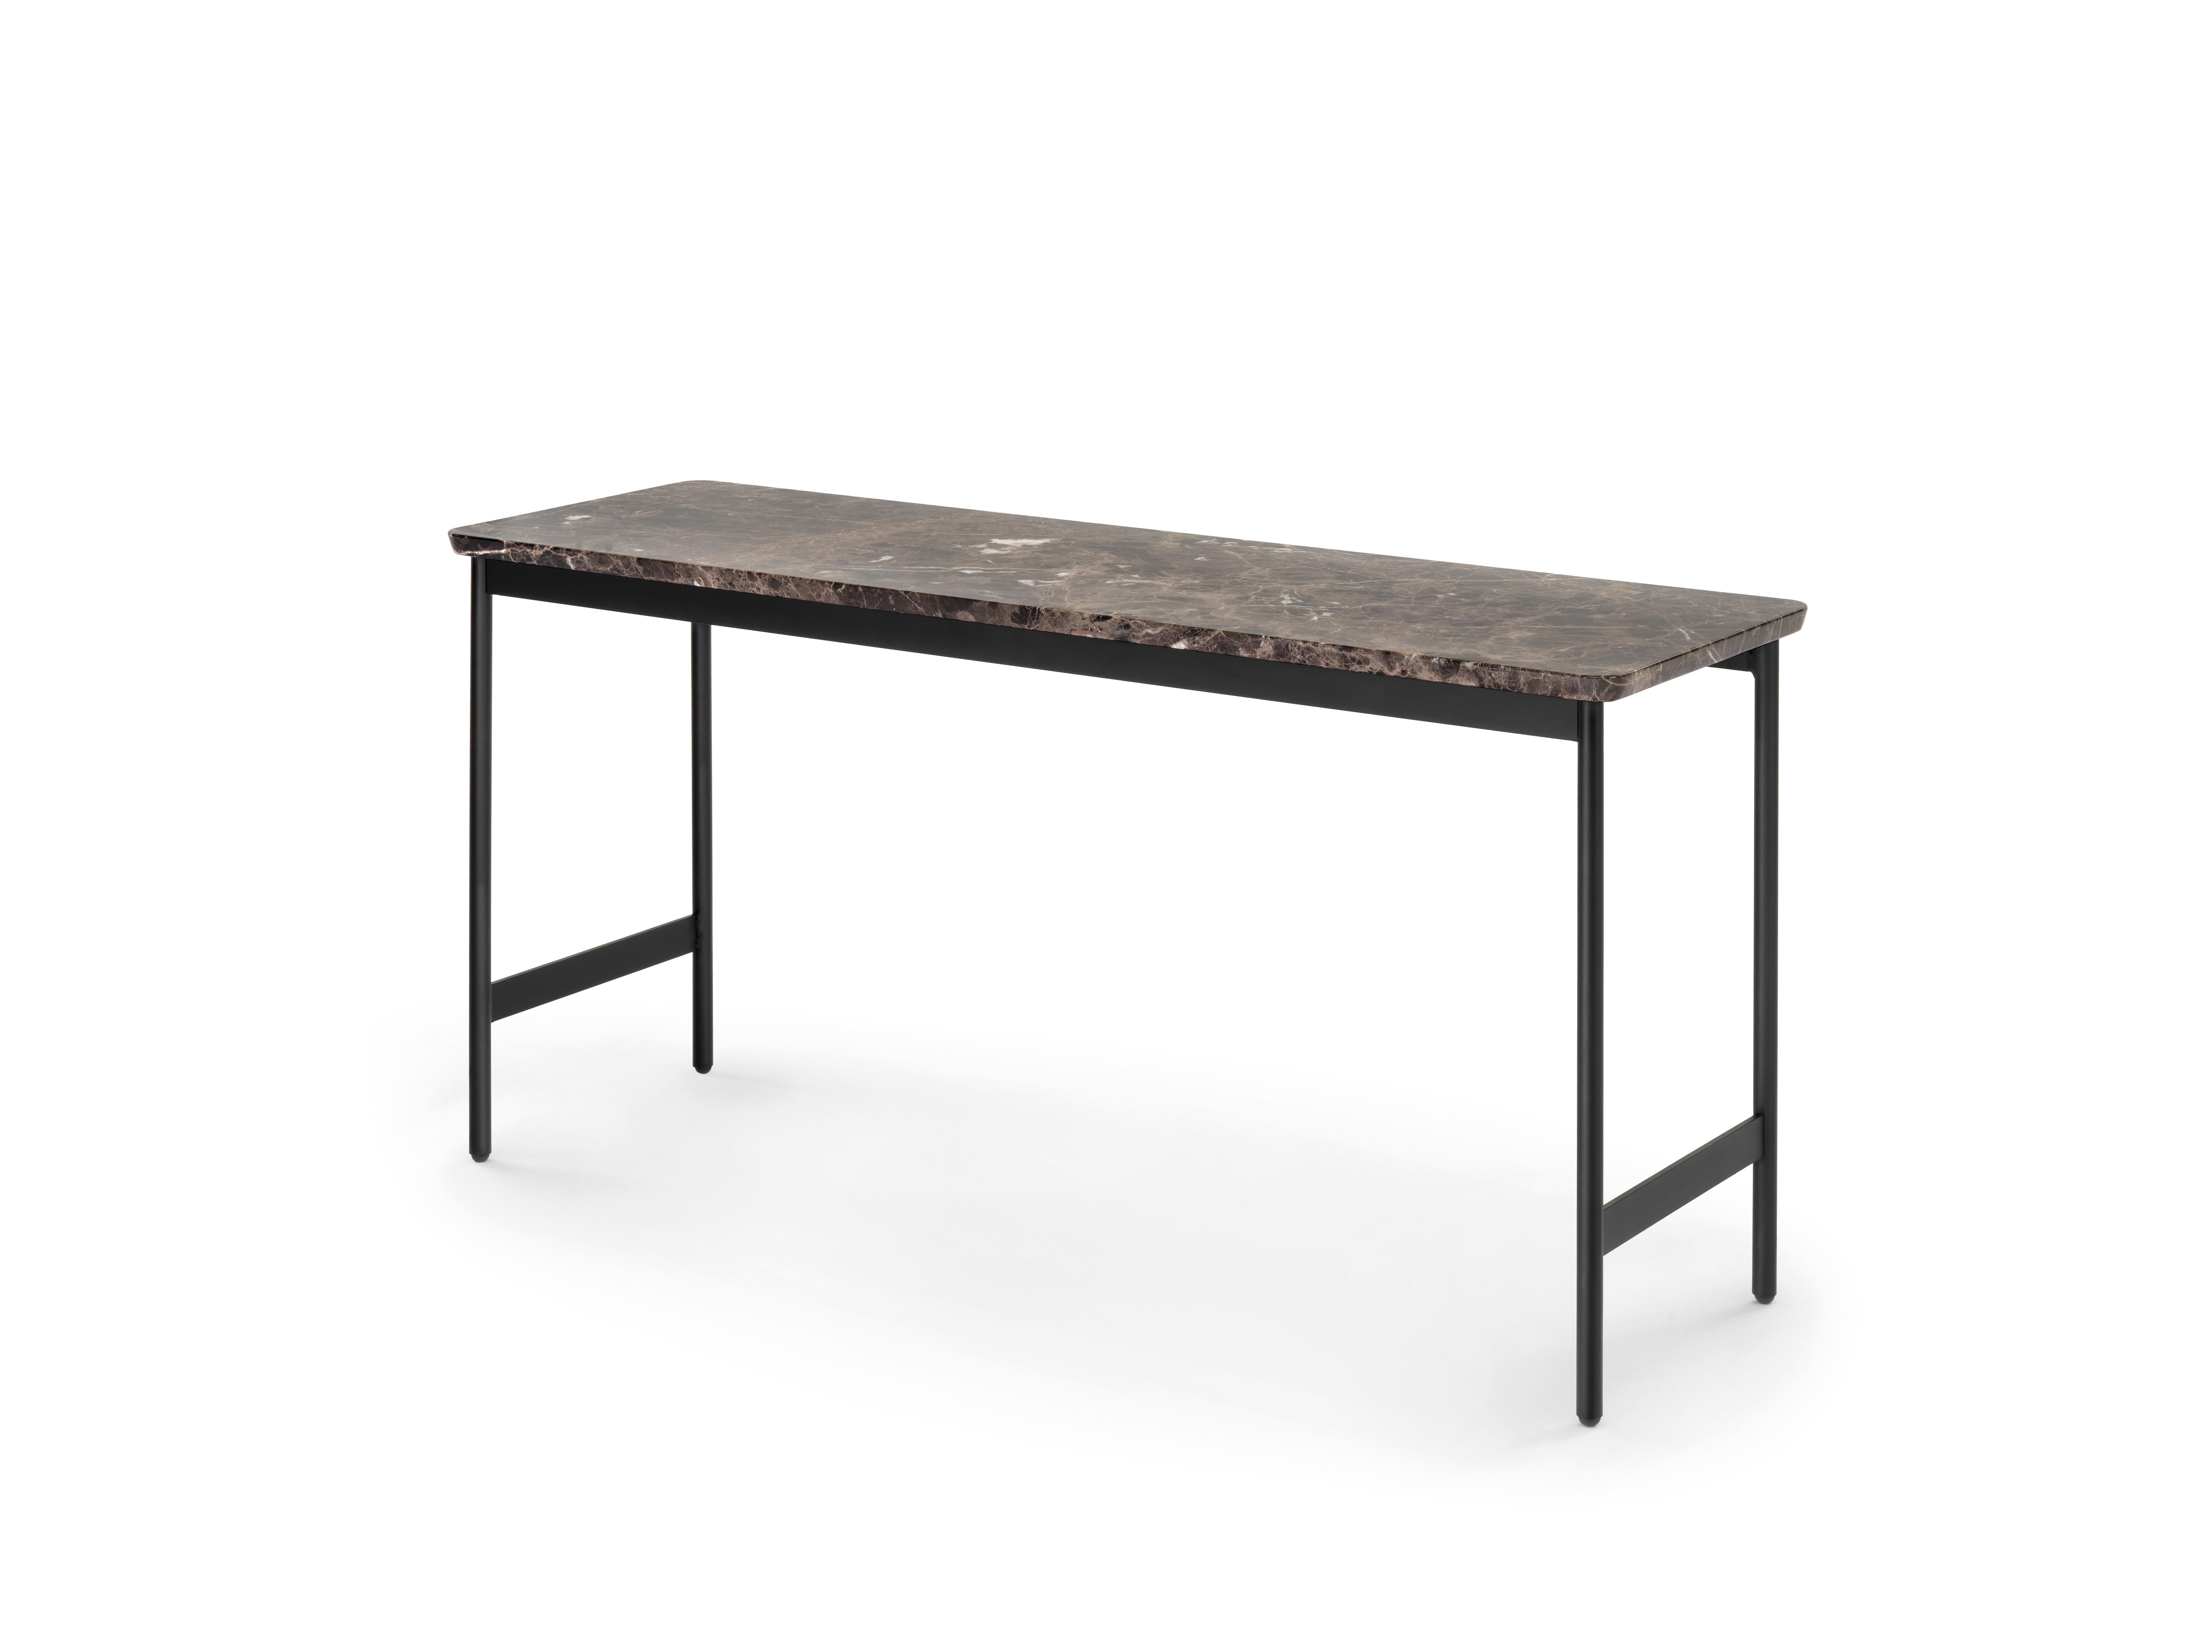 Arflex Capilano Small Table in Emperador Marble Top by Luca Nichetto. Supported by a light and elegant metal structure, Capilano's series of small tables takes its name from the Capilano Suspension Bridge in Vancouver. Originally developed to